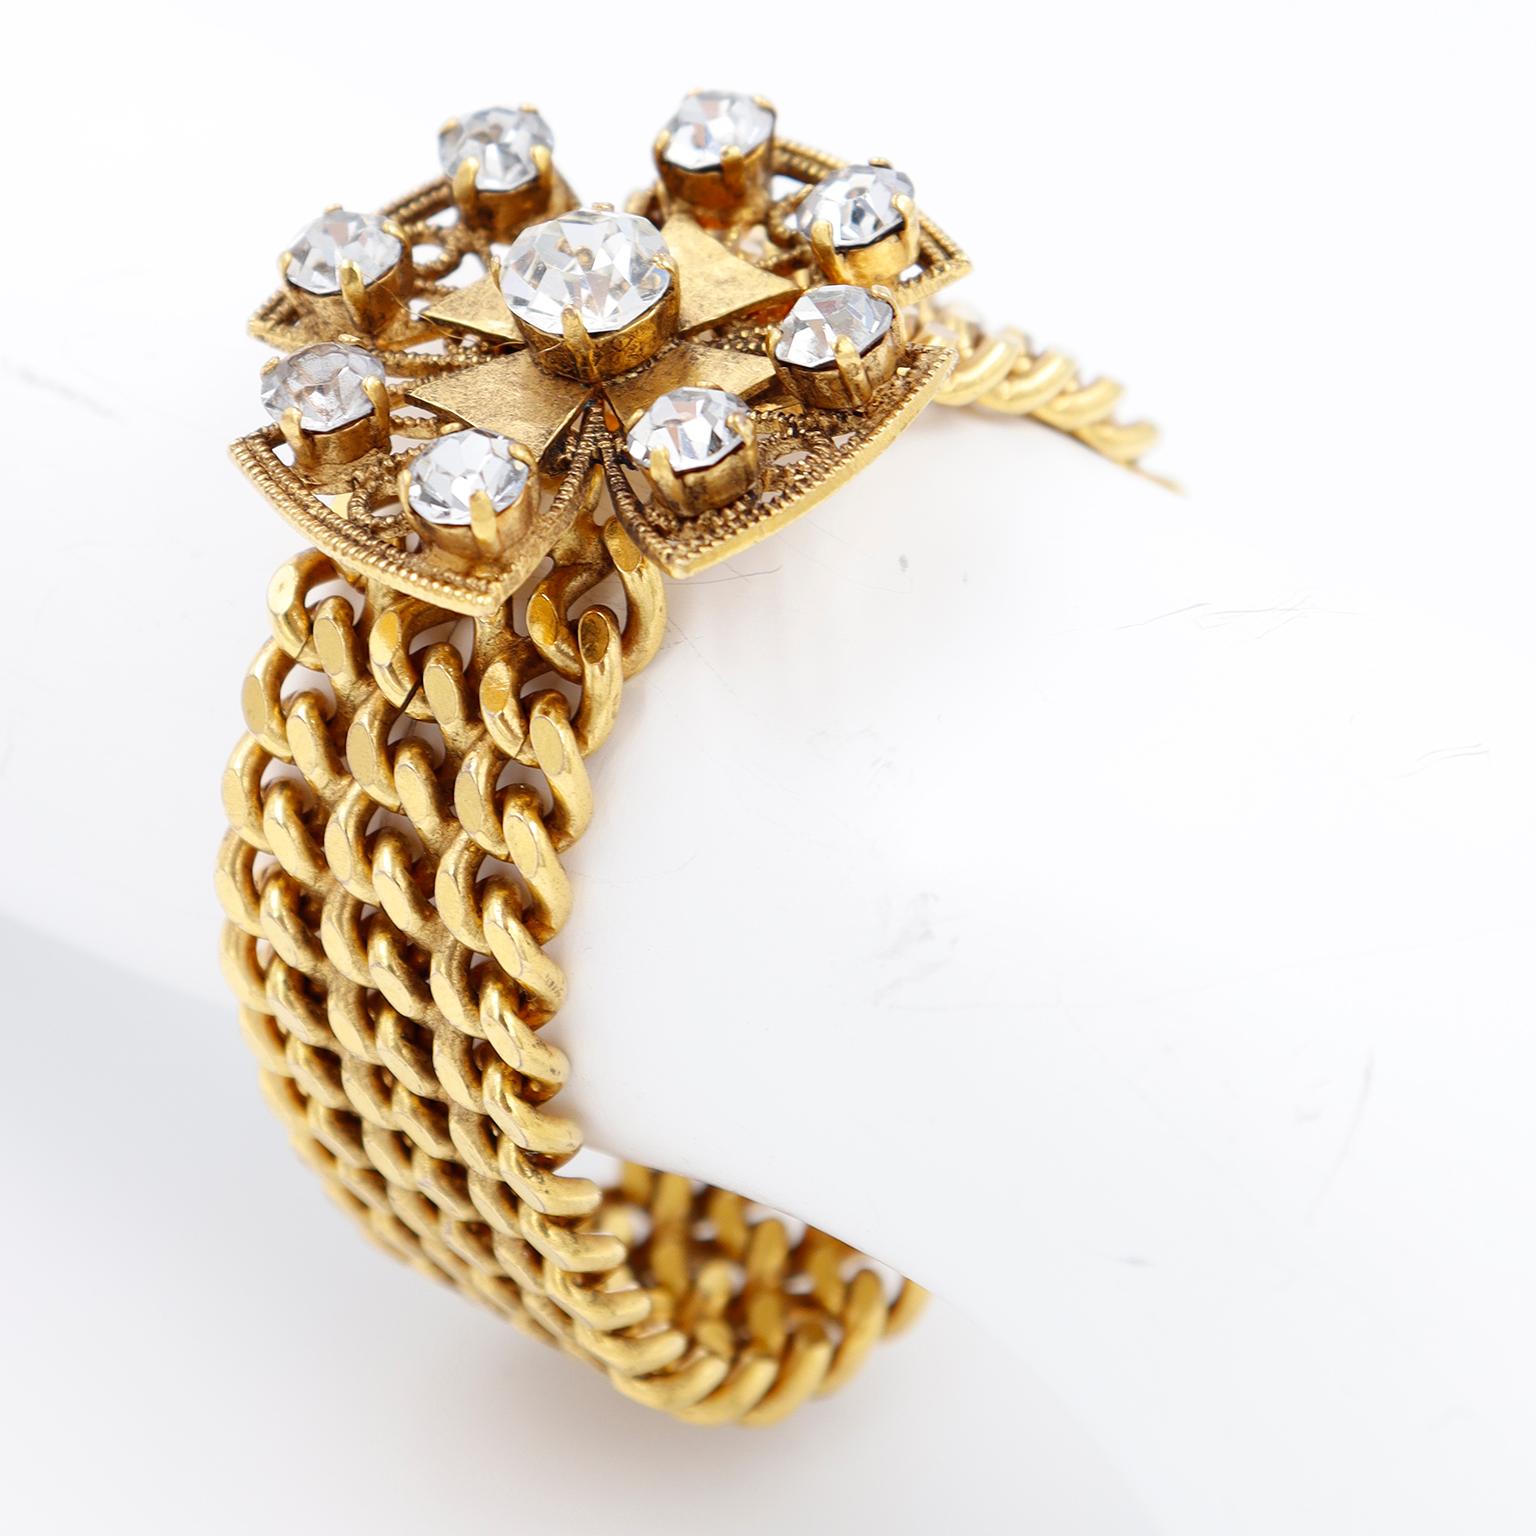 This unique vintage Yves Saint Laurent bracelet is comprised of a triple row of gold plated curb chains that close with a branded YSL hook under a maltese cross embellished with faceted rhinestones. This bracelet is comfortable to wear and is